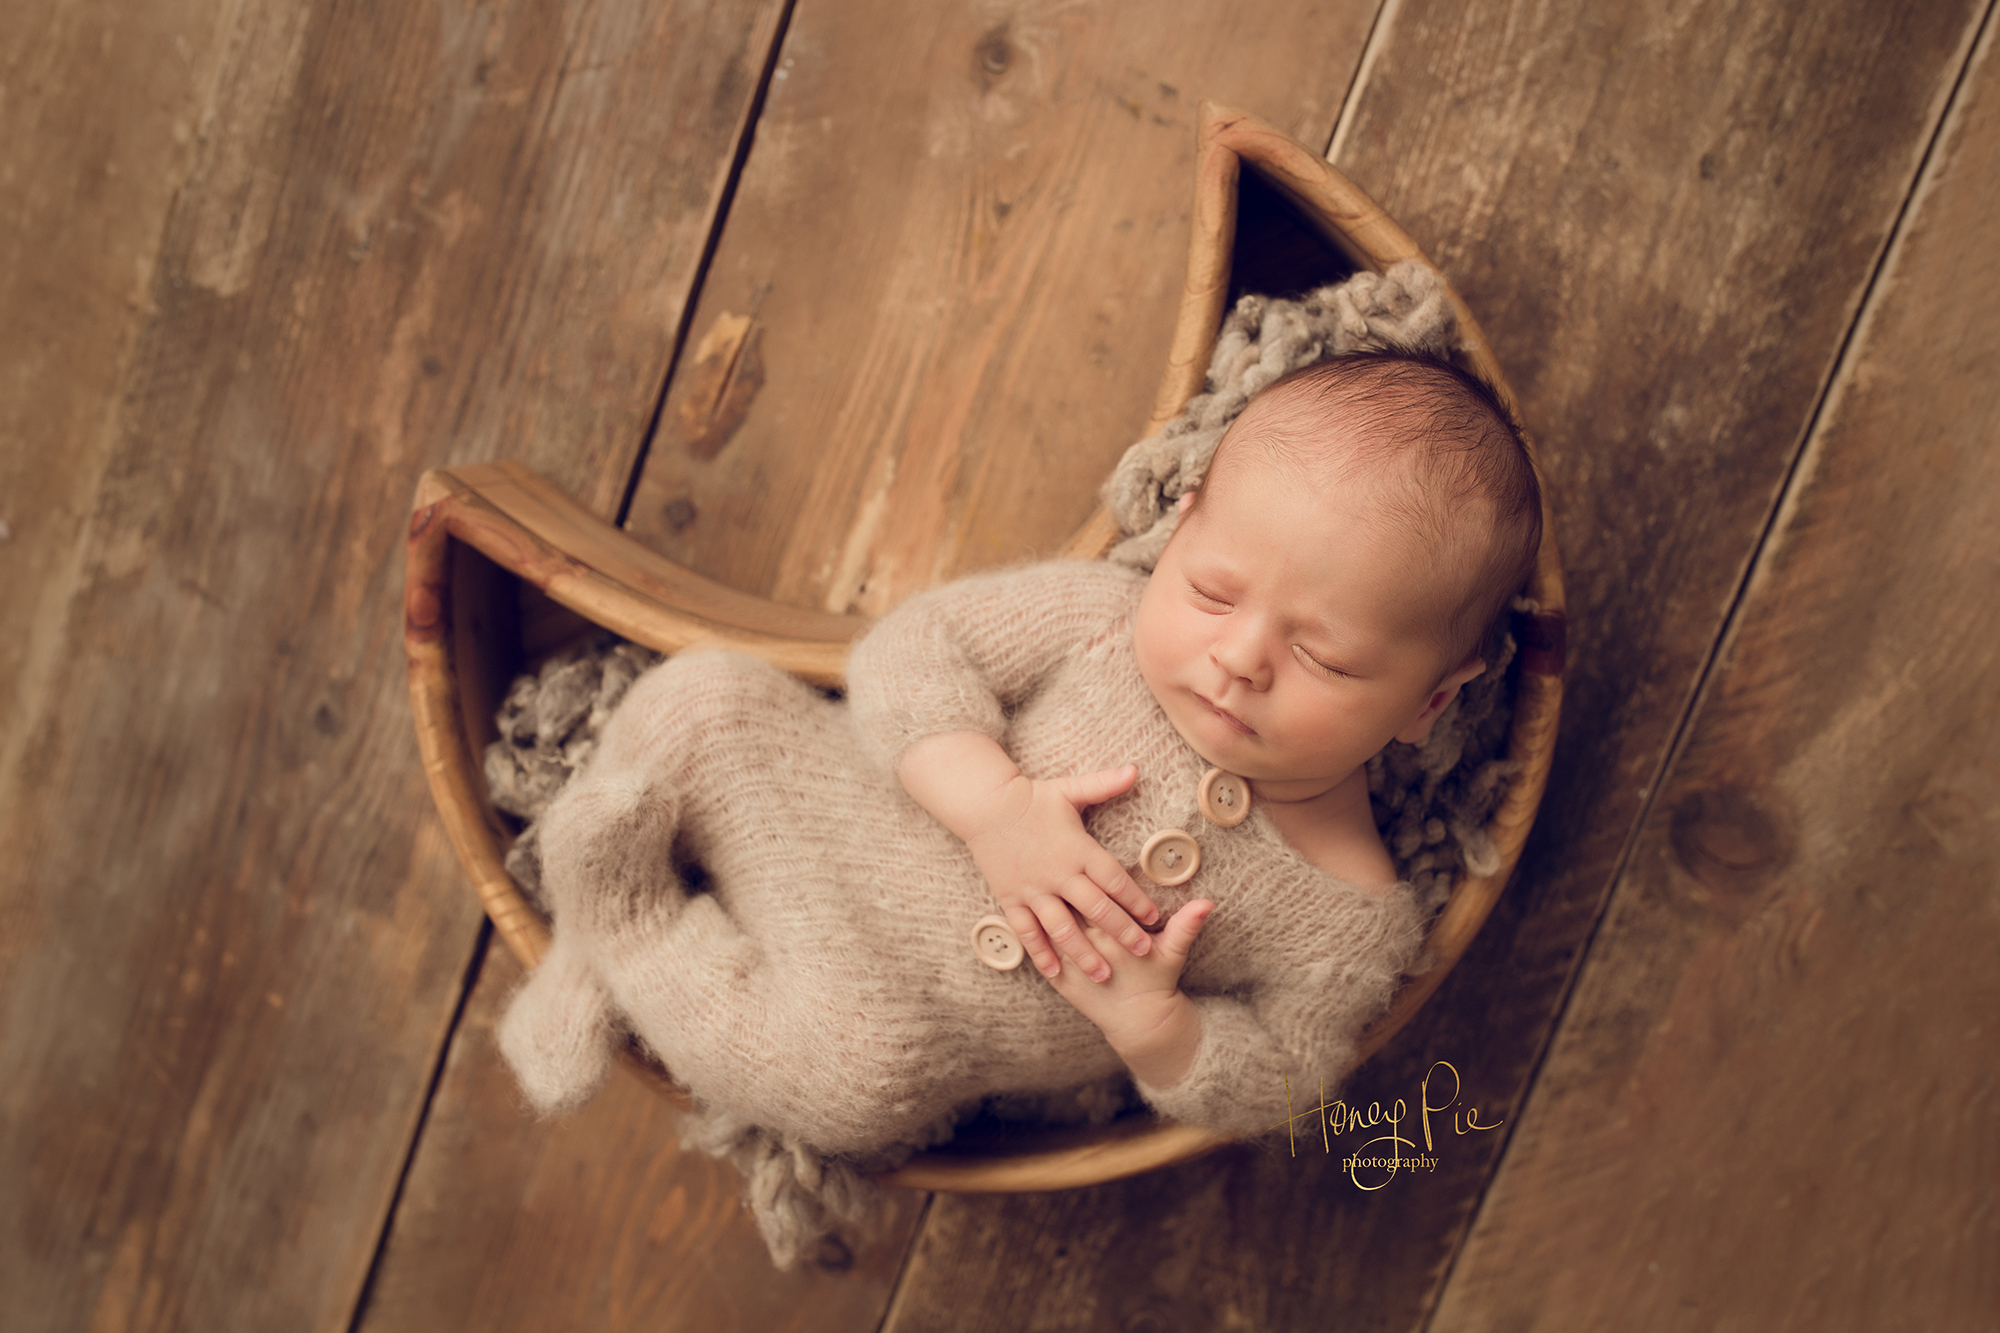 Baby boy fast asleep in a moon at a photoshoot wearing a fluffy soft romper suit